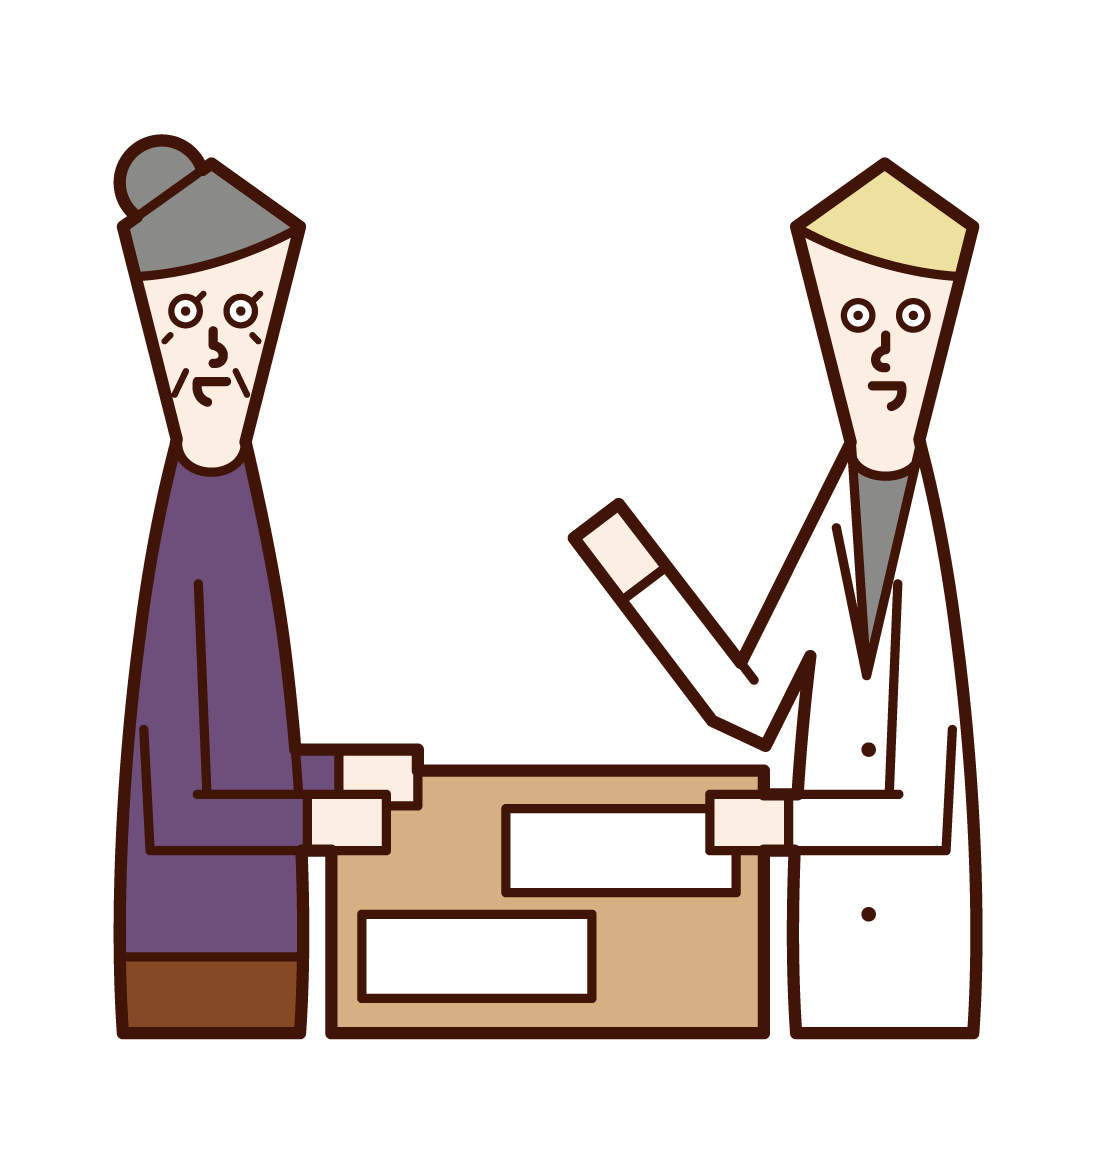 Illustration of a pharmacist (male) working in a pharmacy